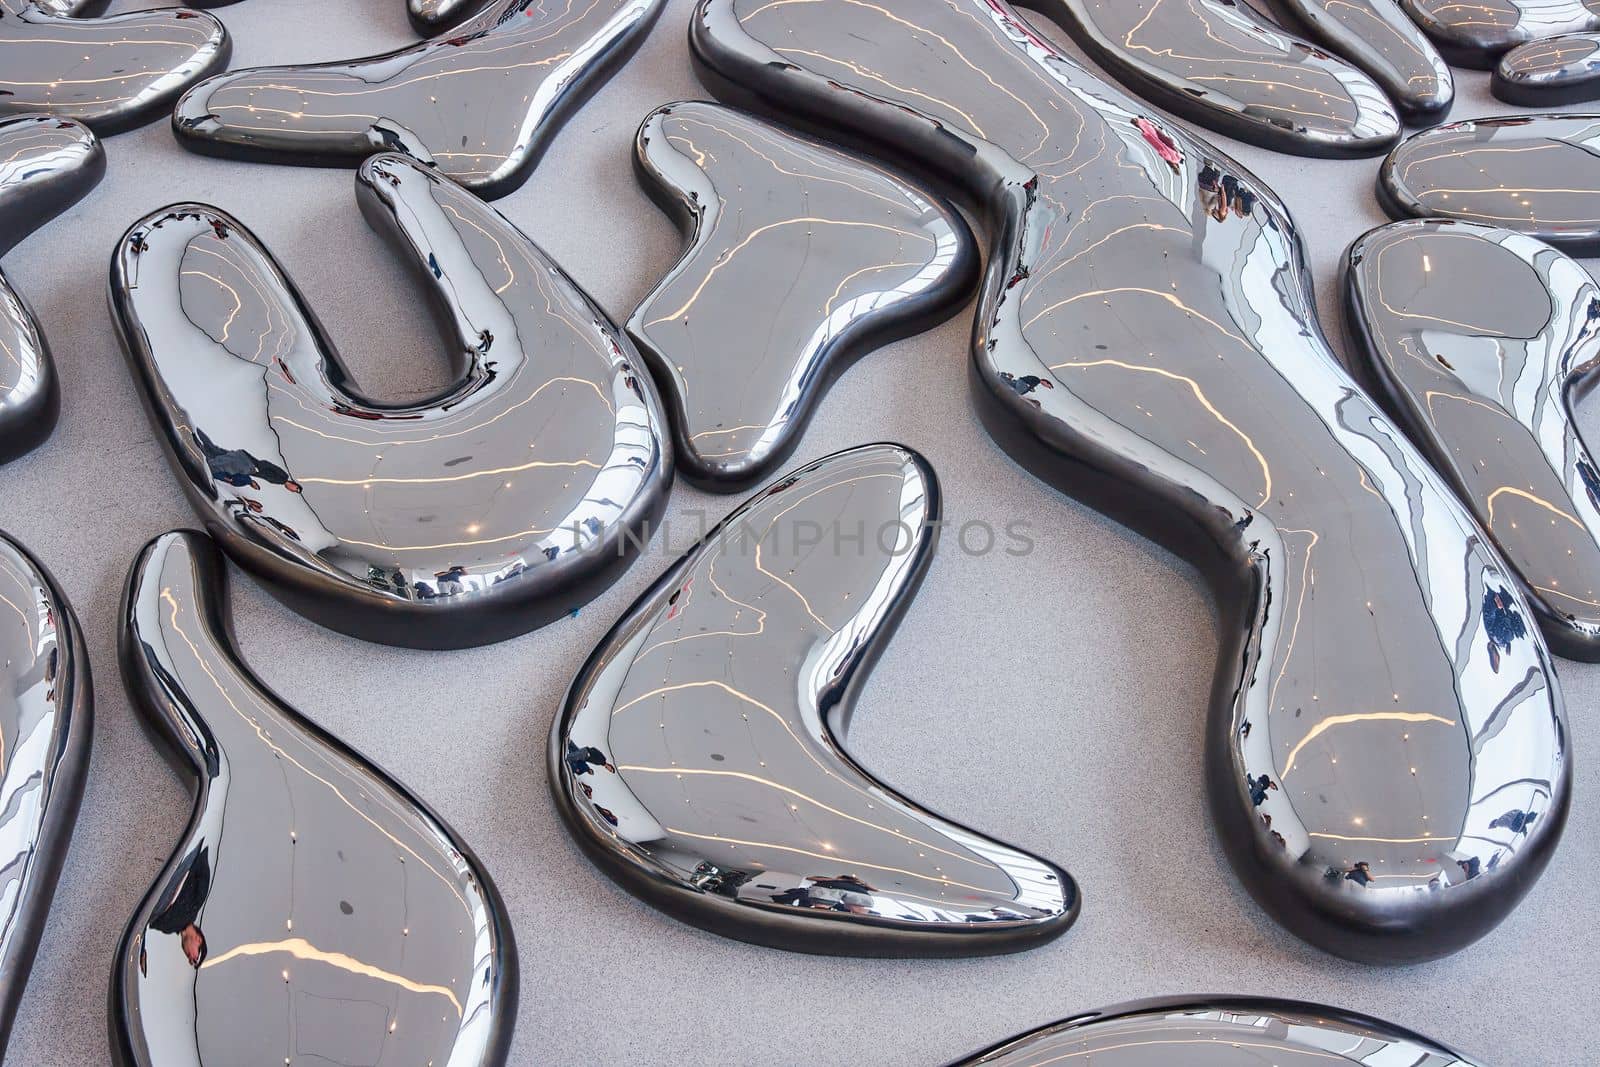 Ground covered in large melted reflecting metal shapes in exhibit by njproductions